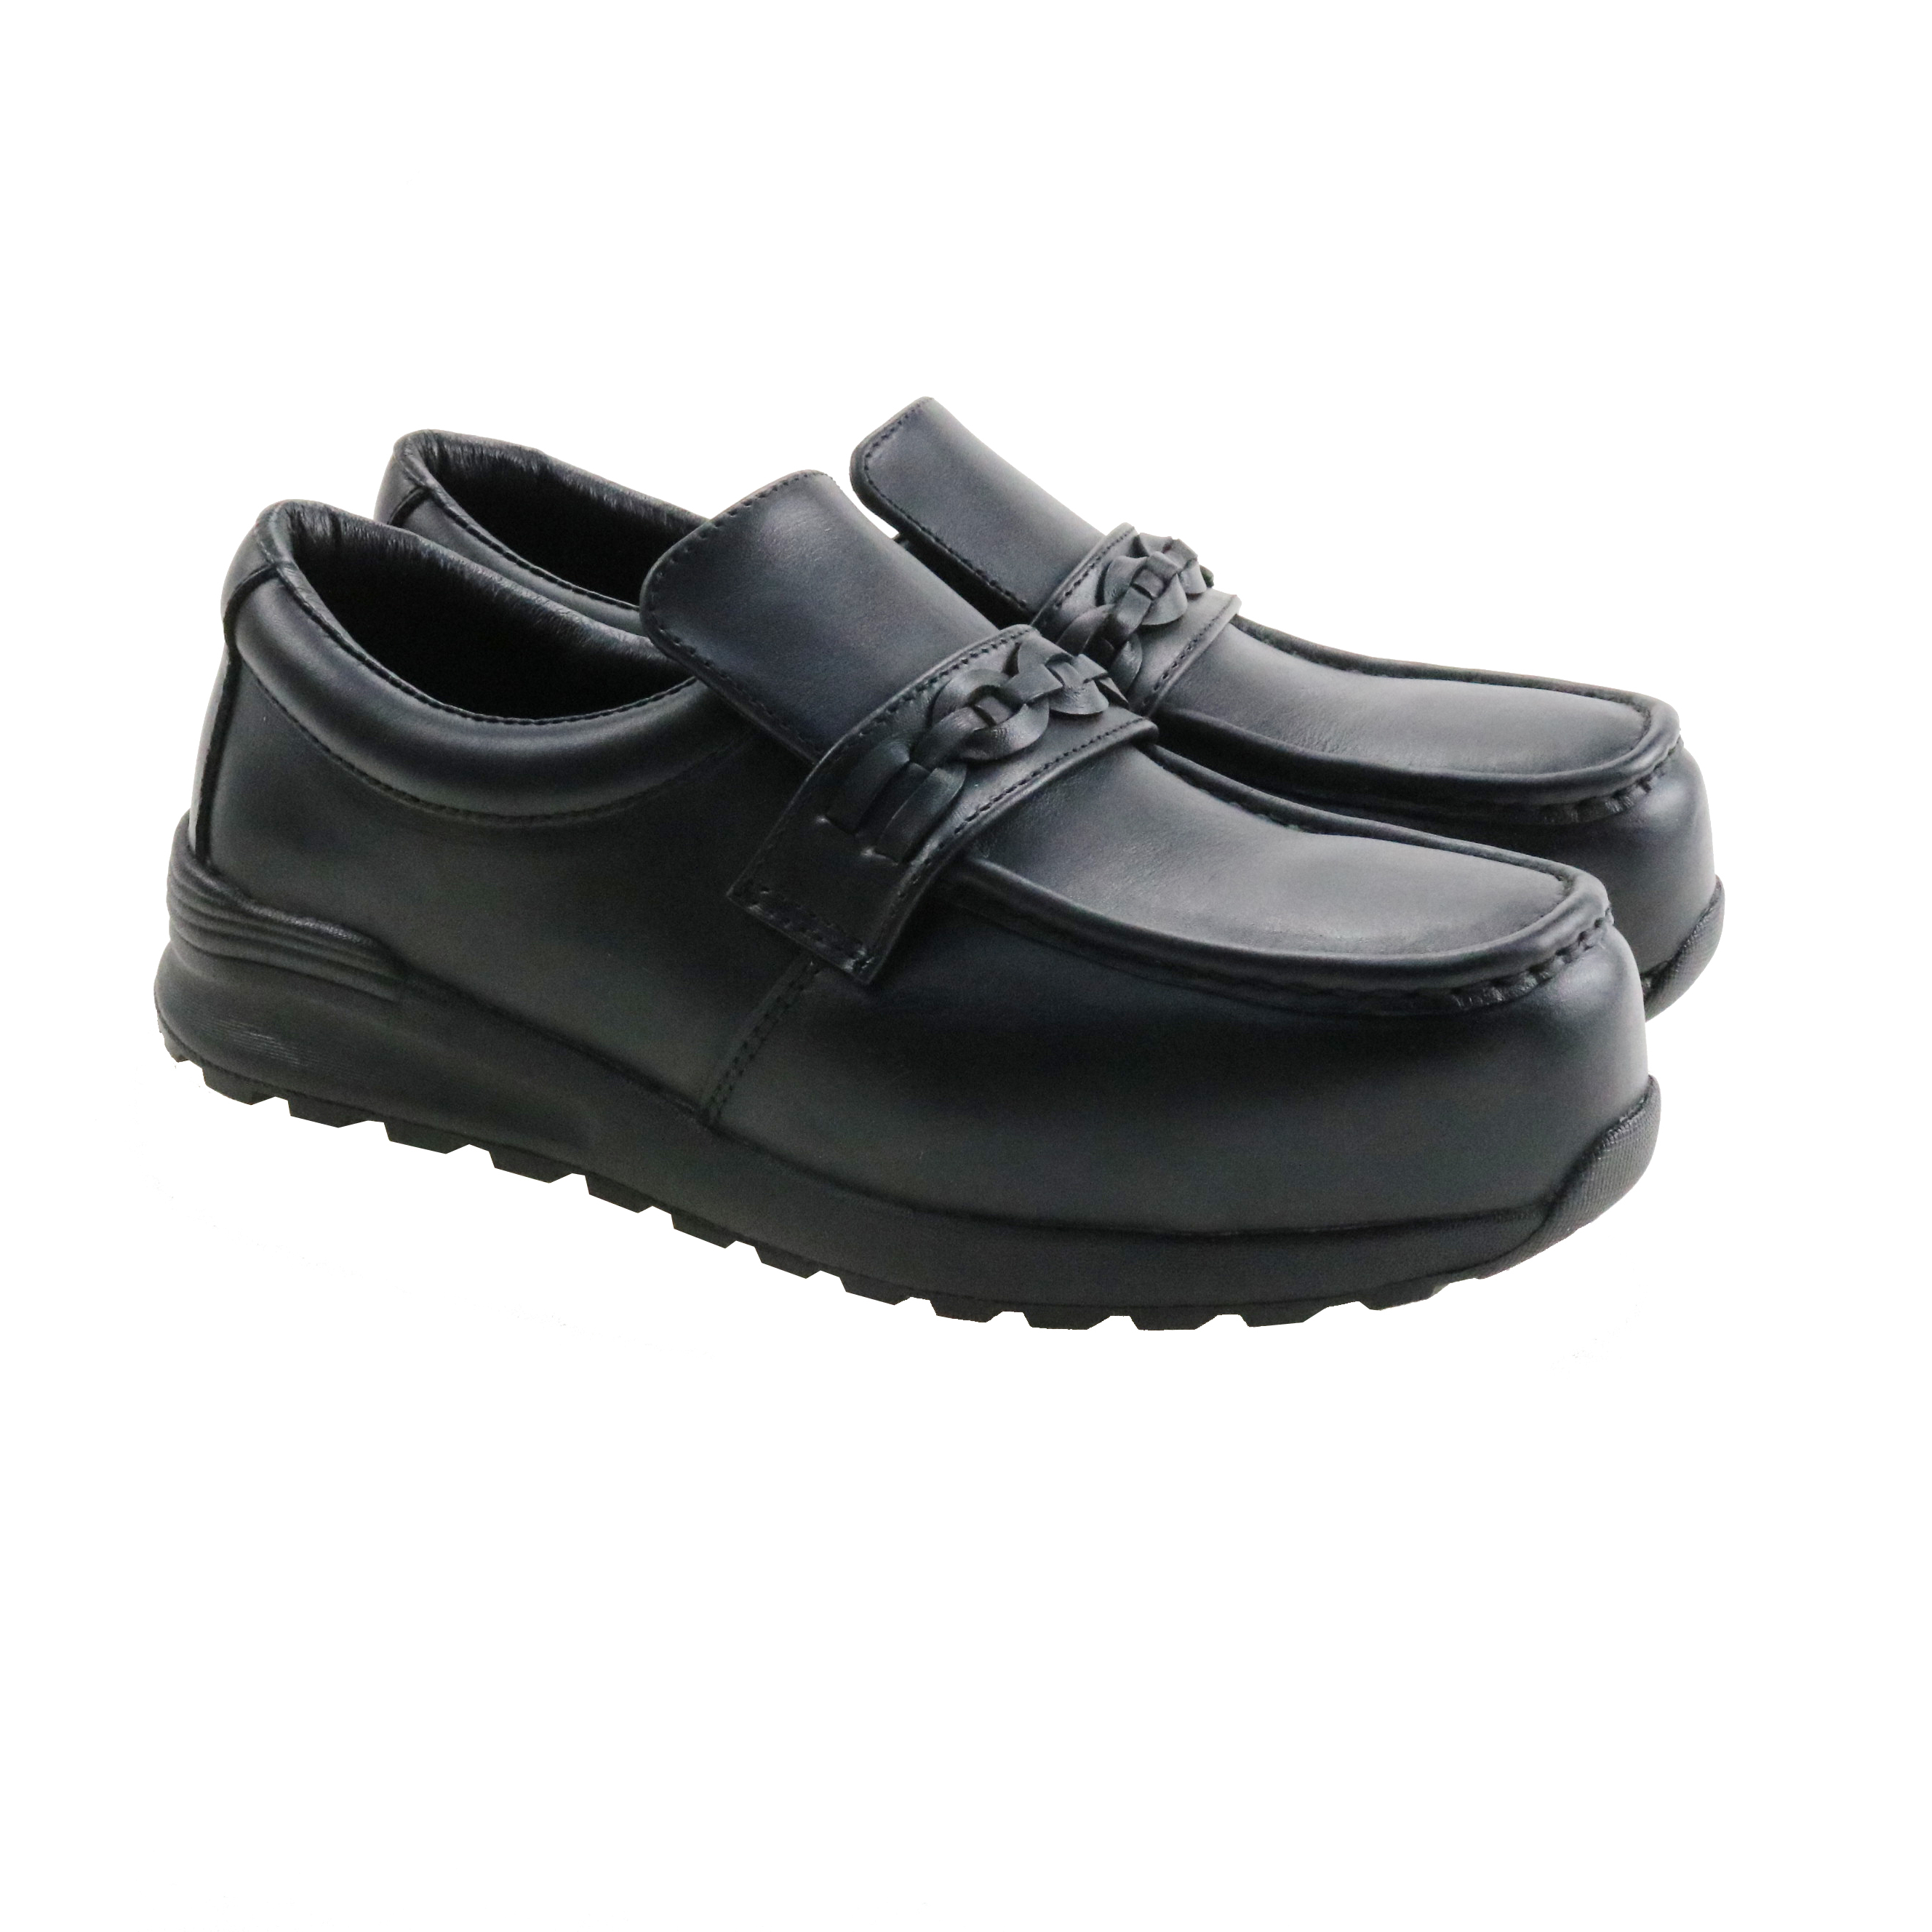 New Style Non-slip Administrative Office Working Safety Shoes